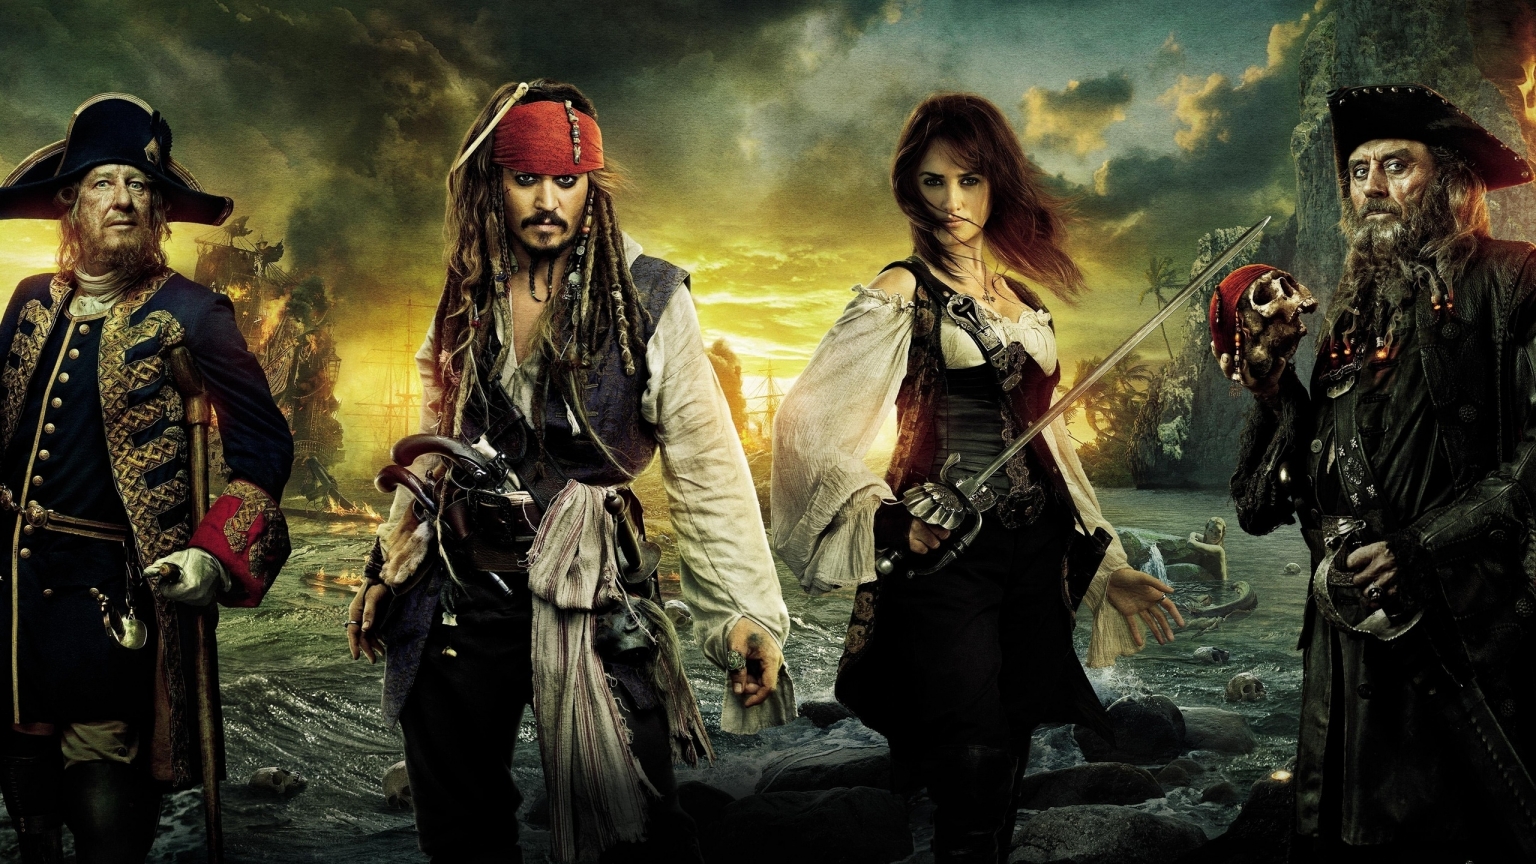 Pirates of the Caribbean Characters for 1536 x 864 HDTV resolution